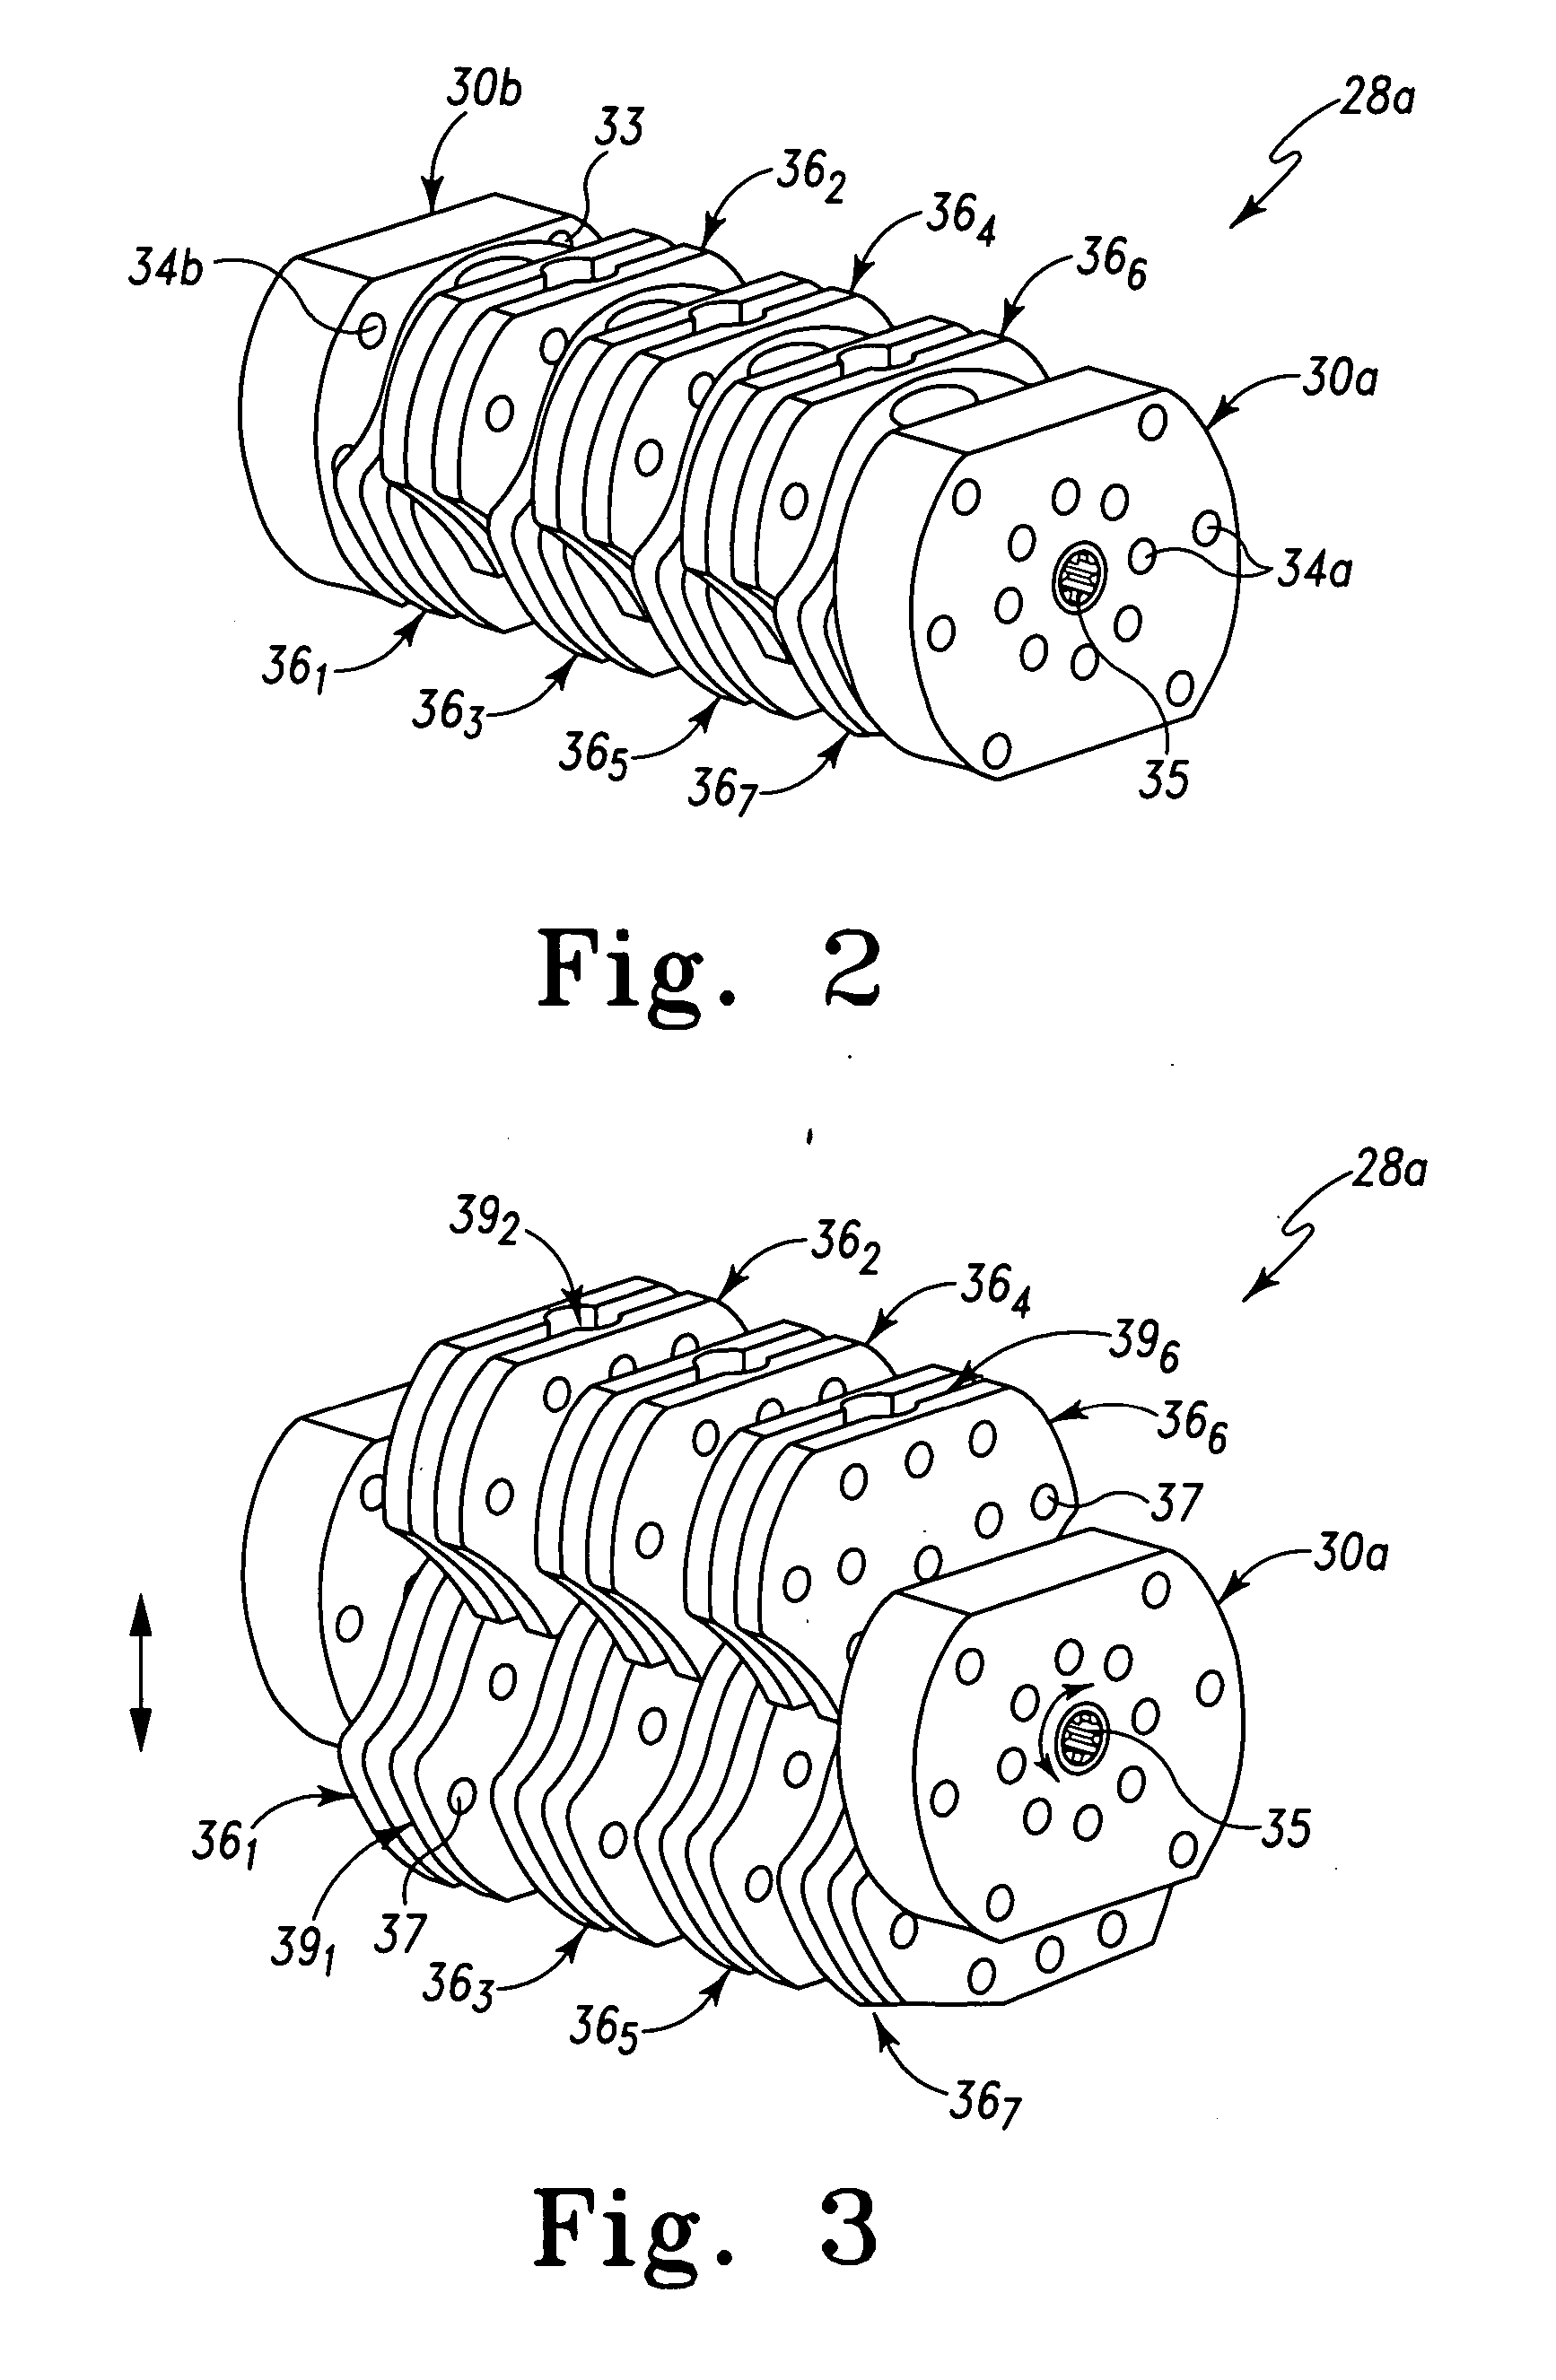 Expandable spinal interbody and intravertebral body devices